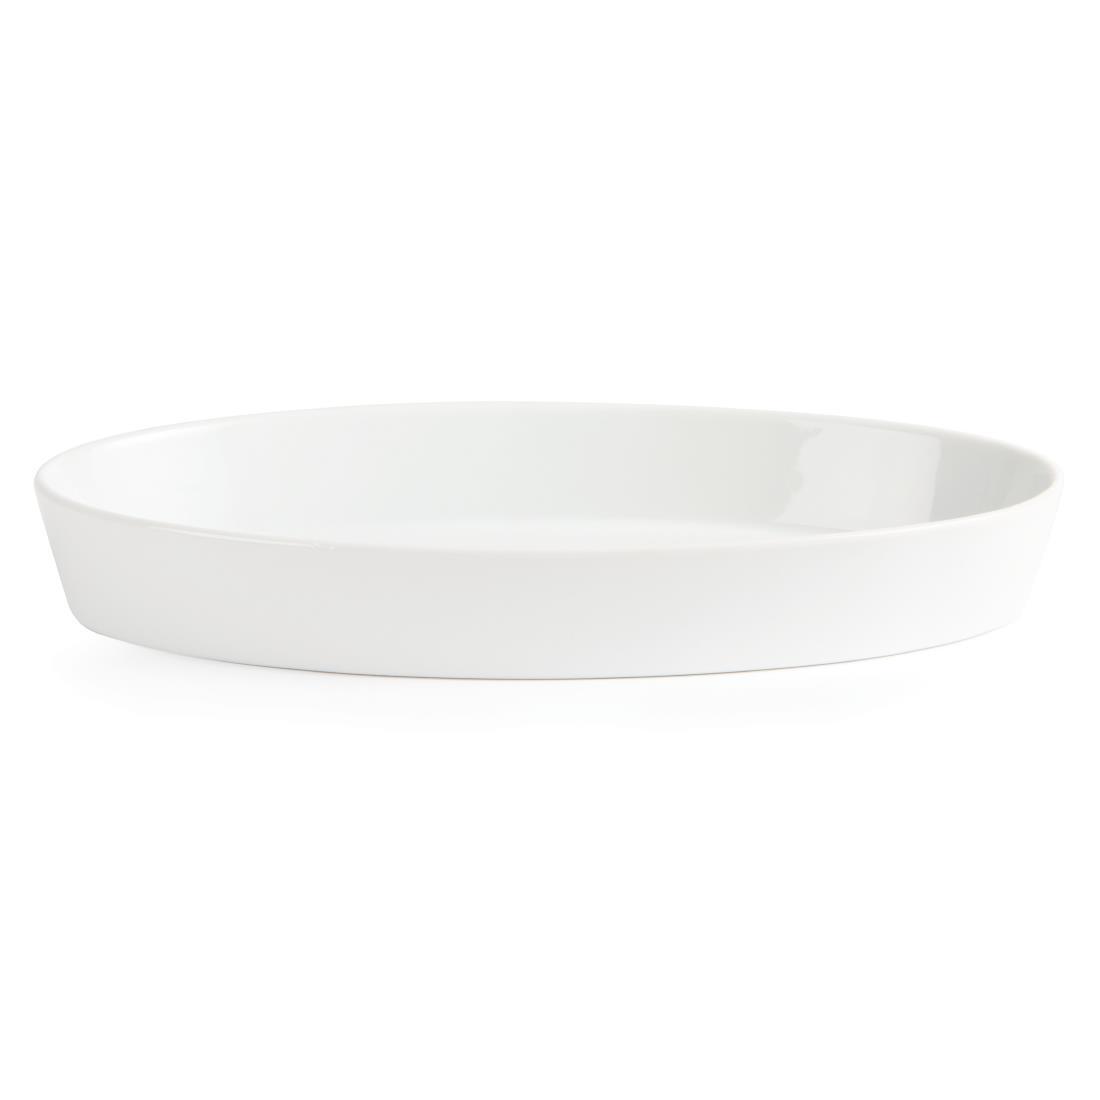 Olympia Whiteware Oval Sole Dishes 283 x 152mm (Pack of 6) - W409  - 3